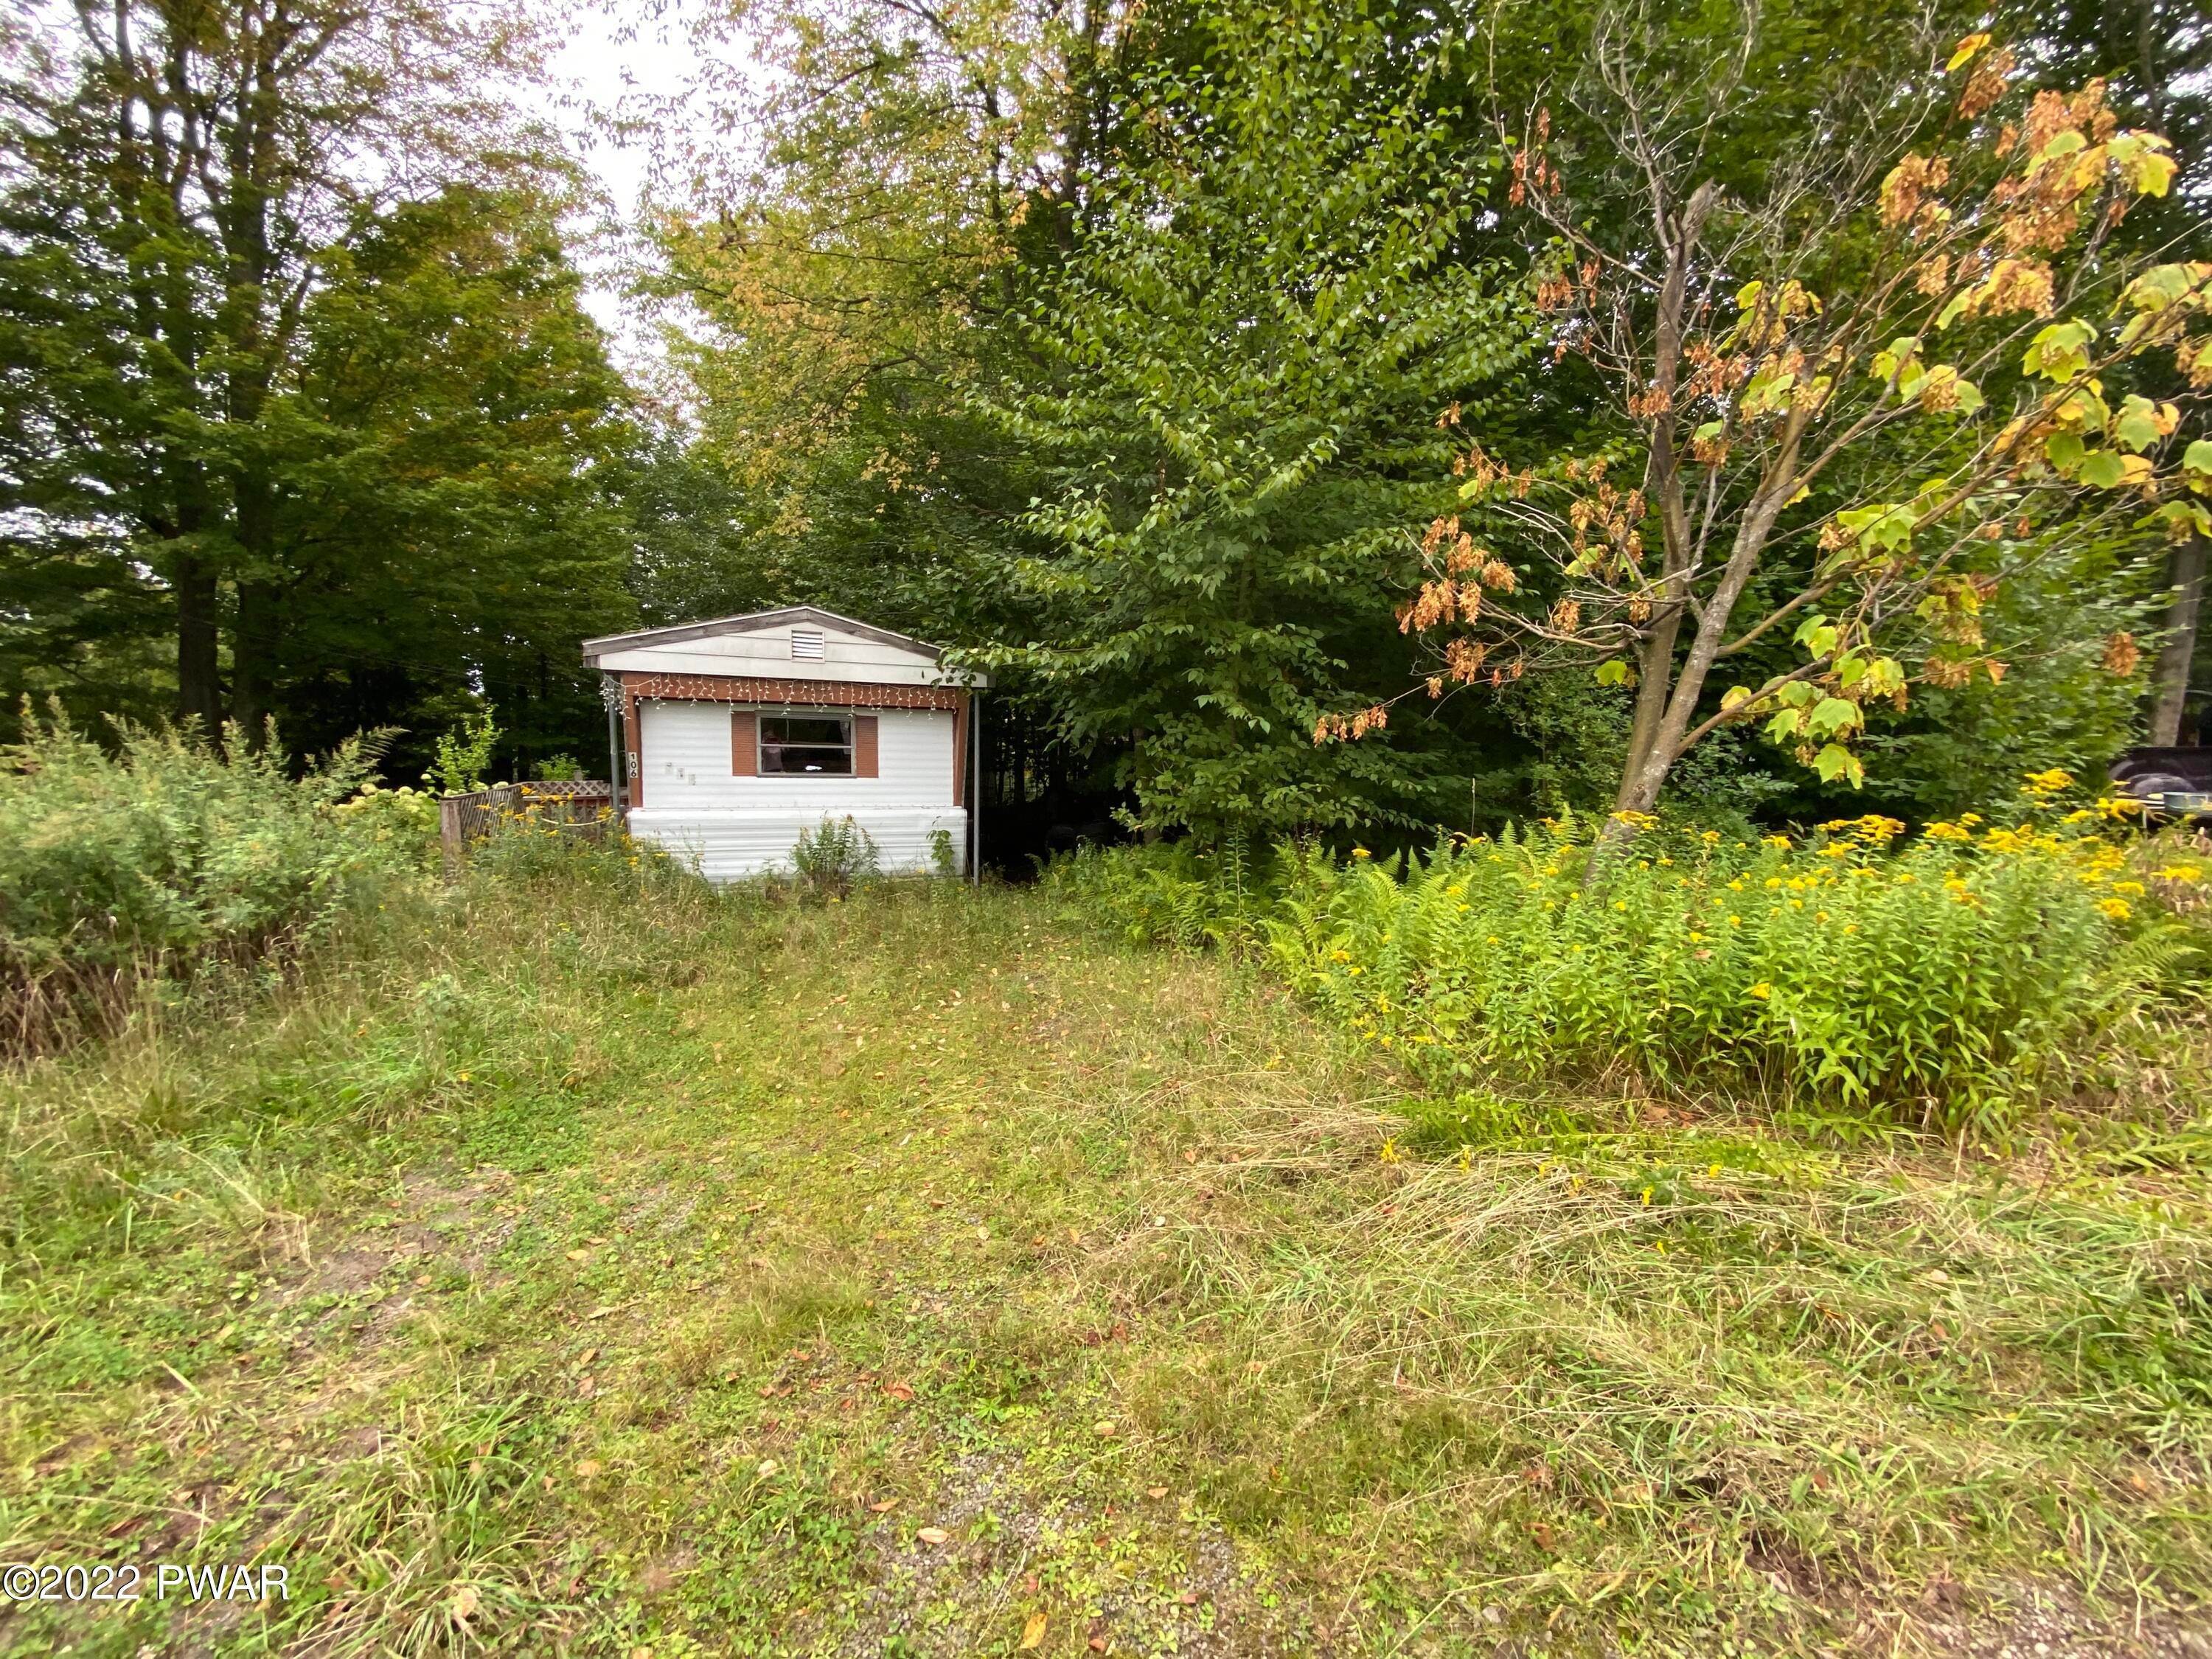 4. Mobile Homes for Sale at 106 Deer Rd Greentown, Pennsylvania 18426 United States